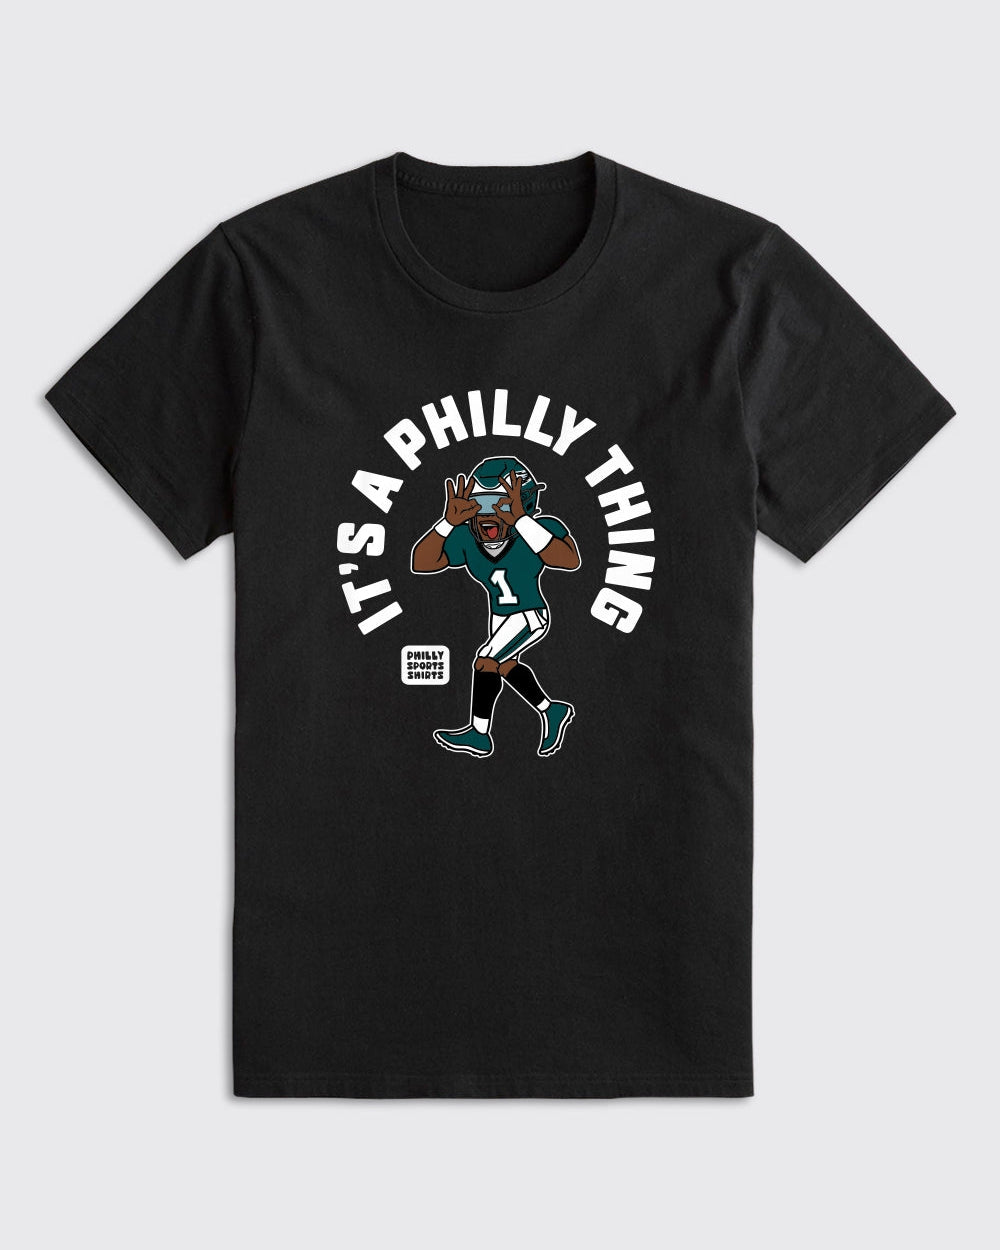 It's A Philly Thing Shirt Black / S